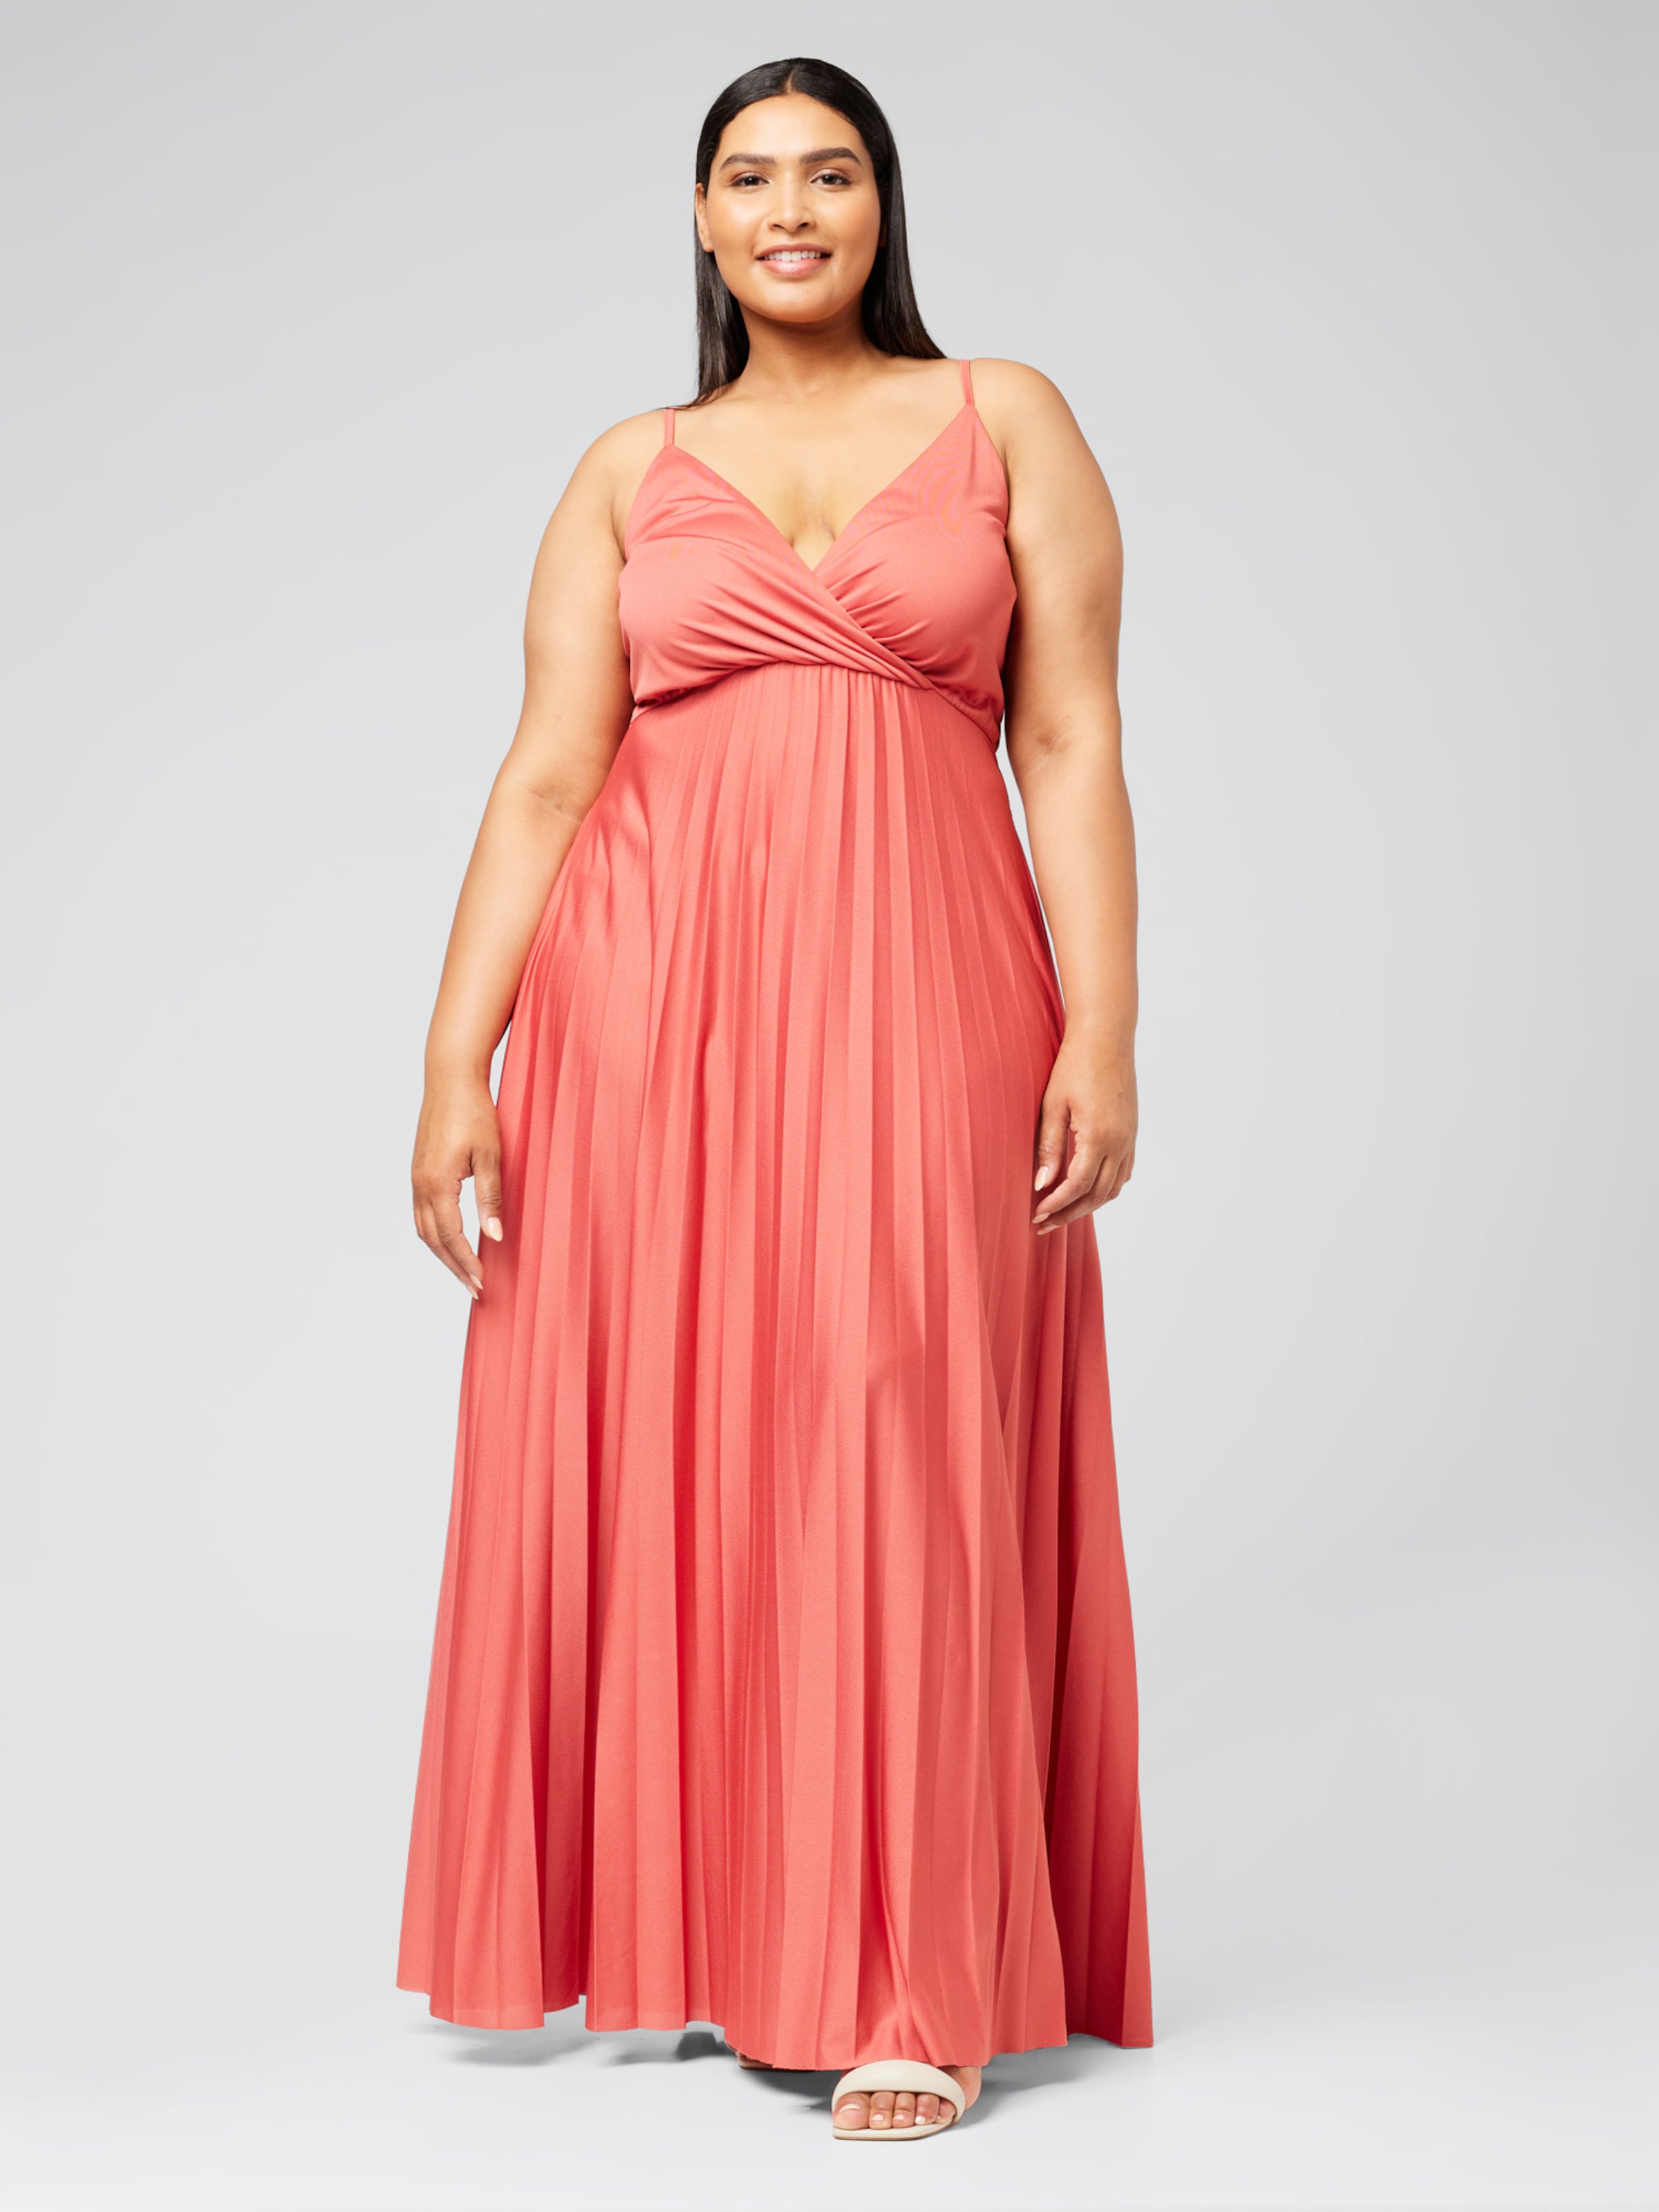 Bridesmaid Dresses Starting From $99 | Birdy Grey